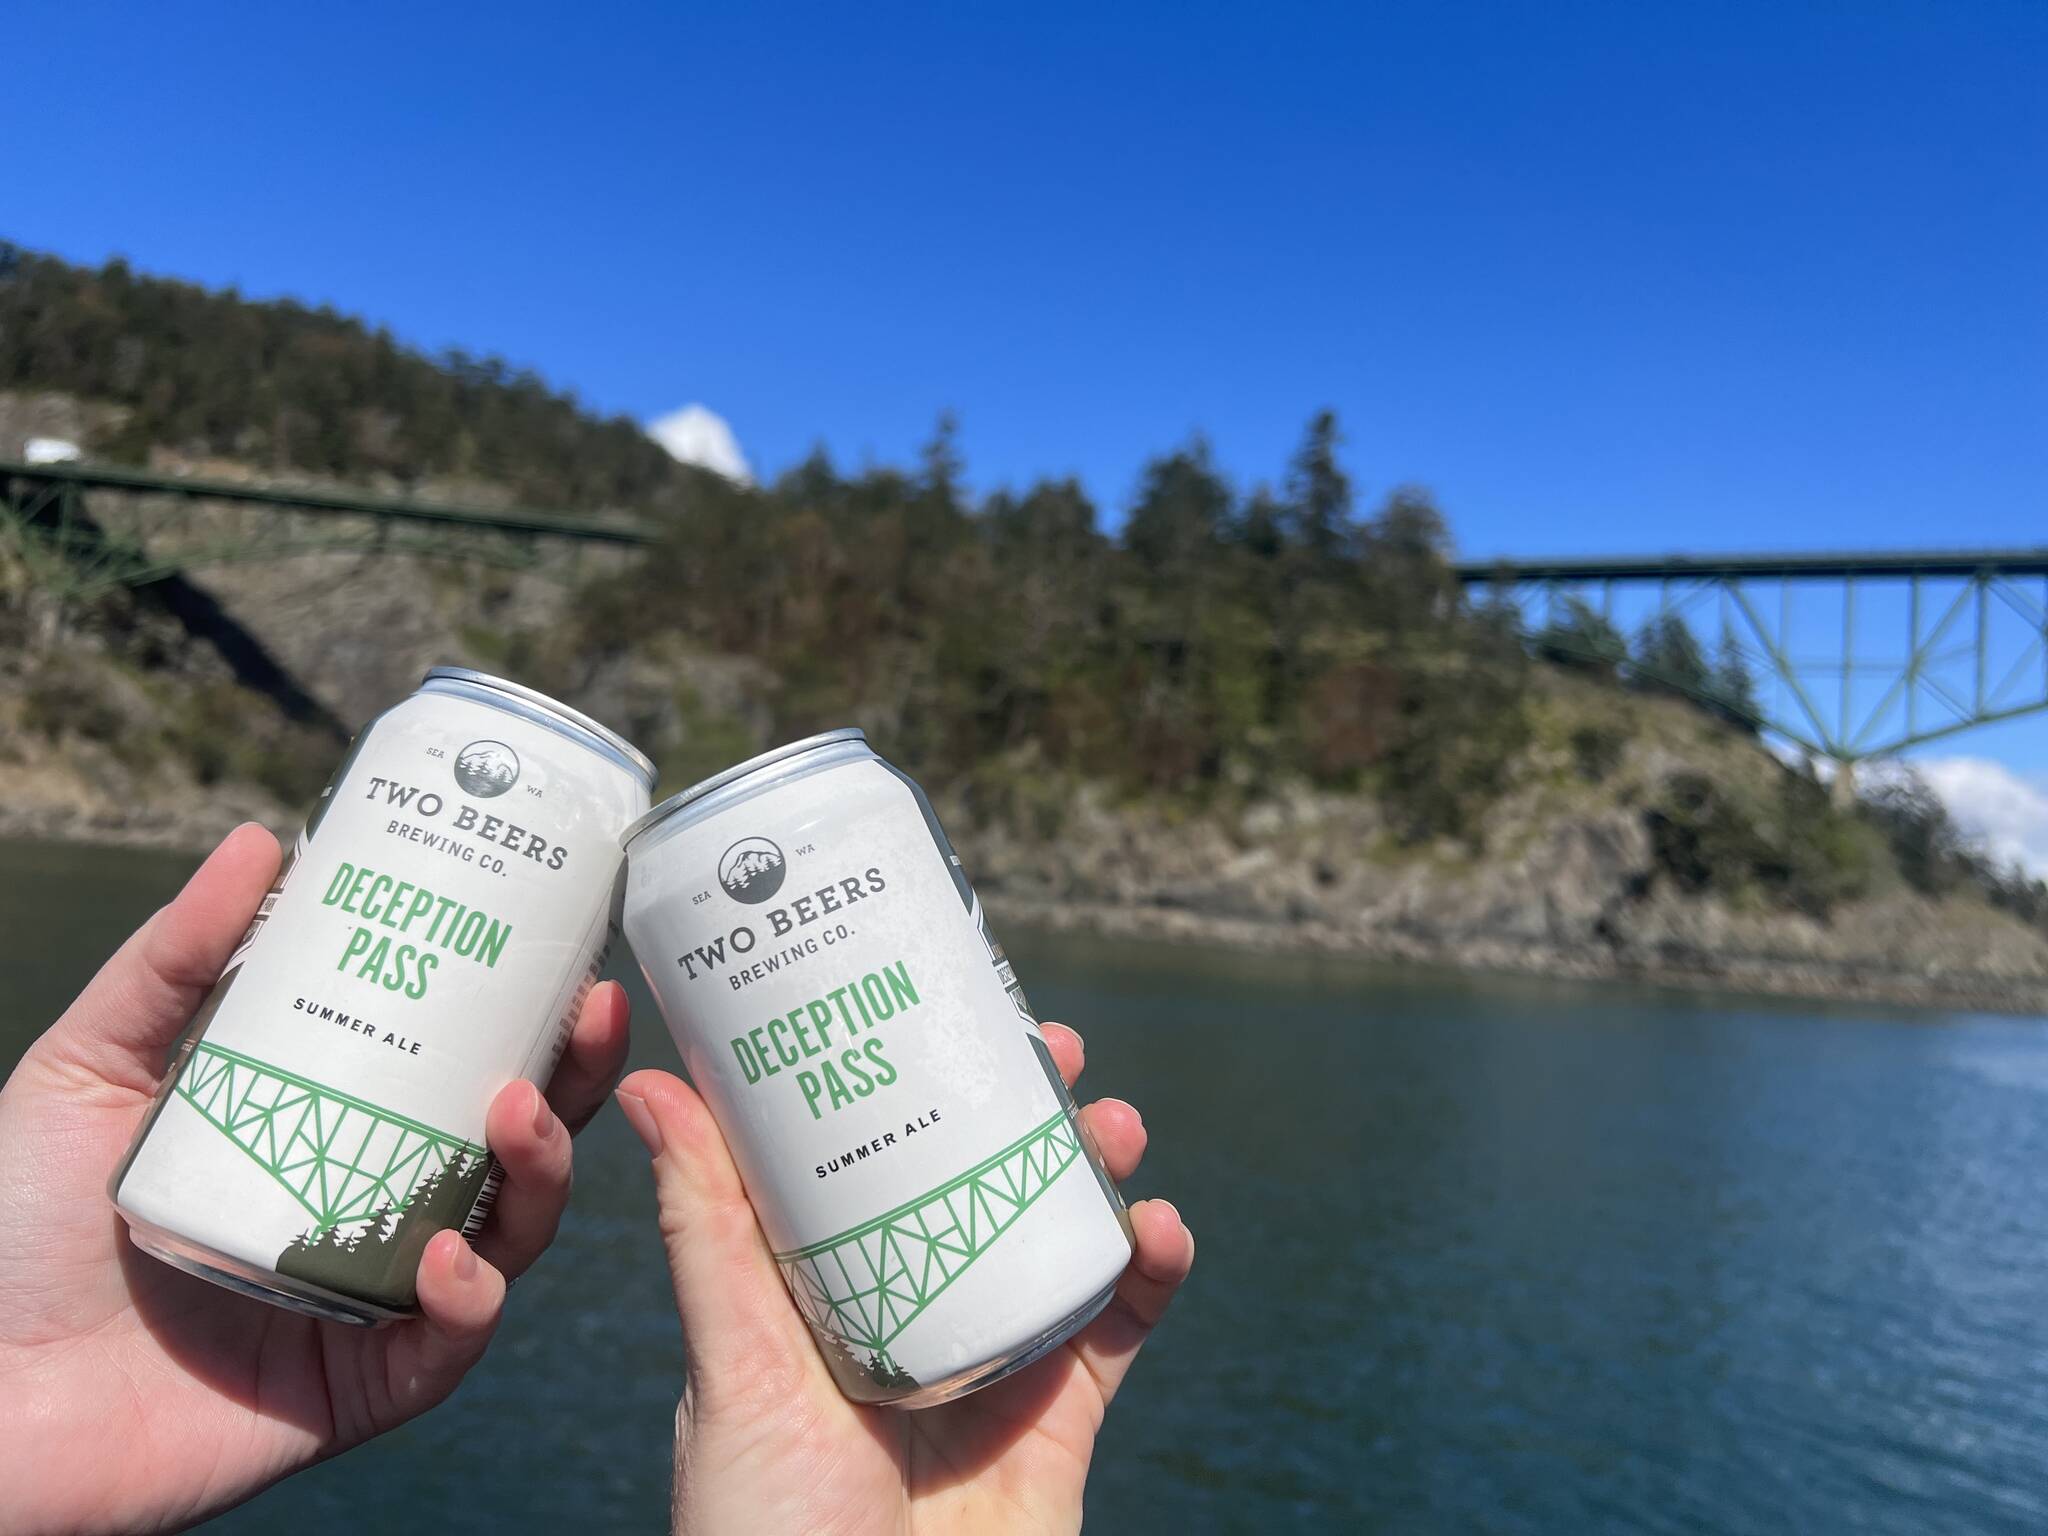 Deception Pass Pale Ale at Deception Pass State Park. (Photo provided by Two Beers Brewing.)